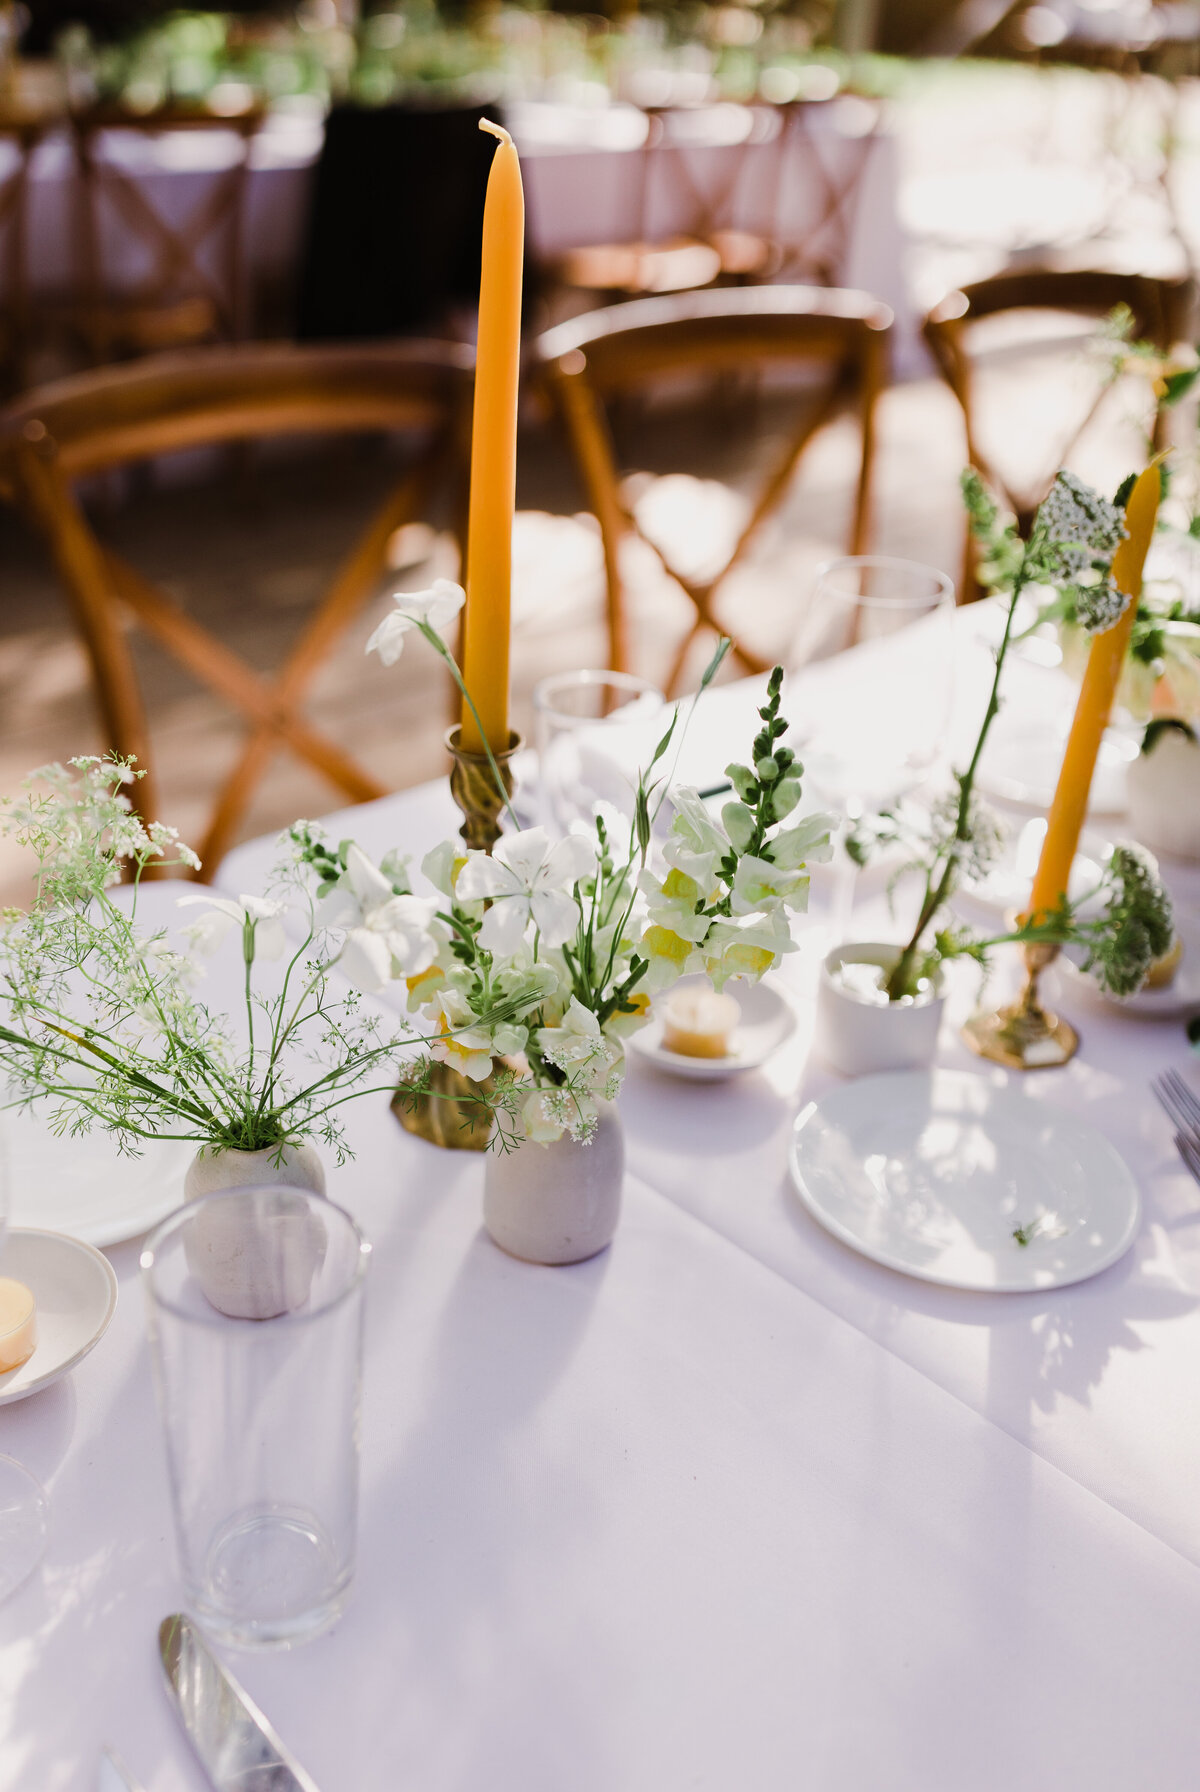 Wedding reception table with  white linen and white florals at Mattie's wedding venue in Austin